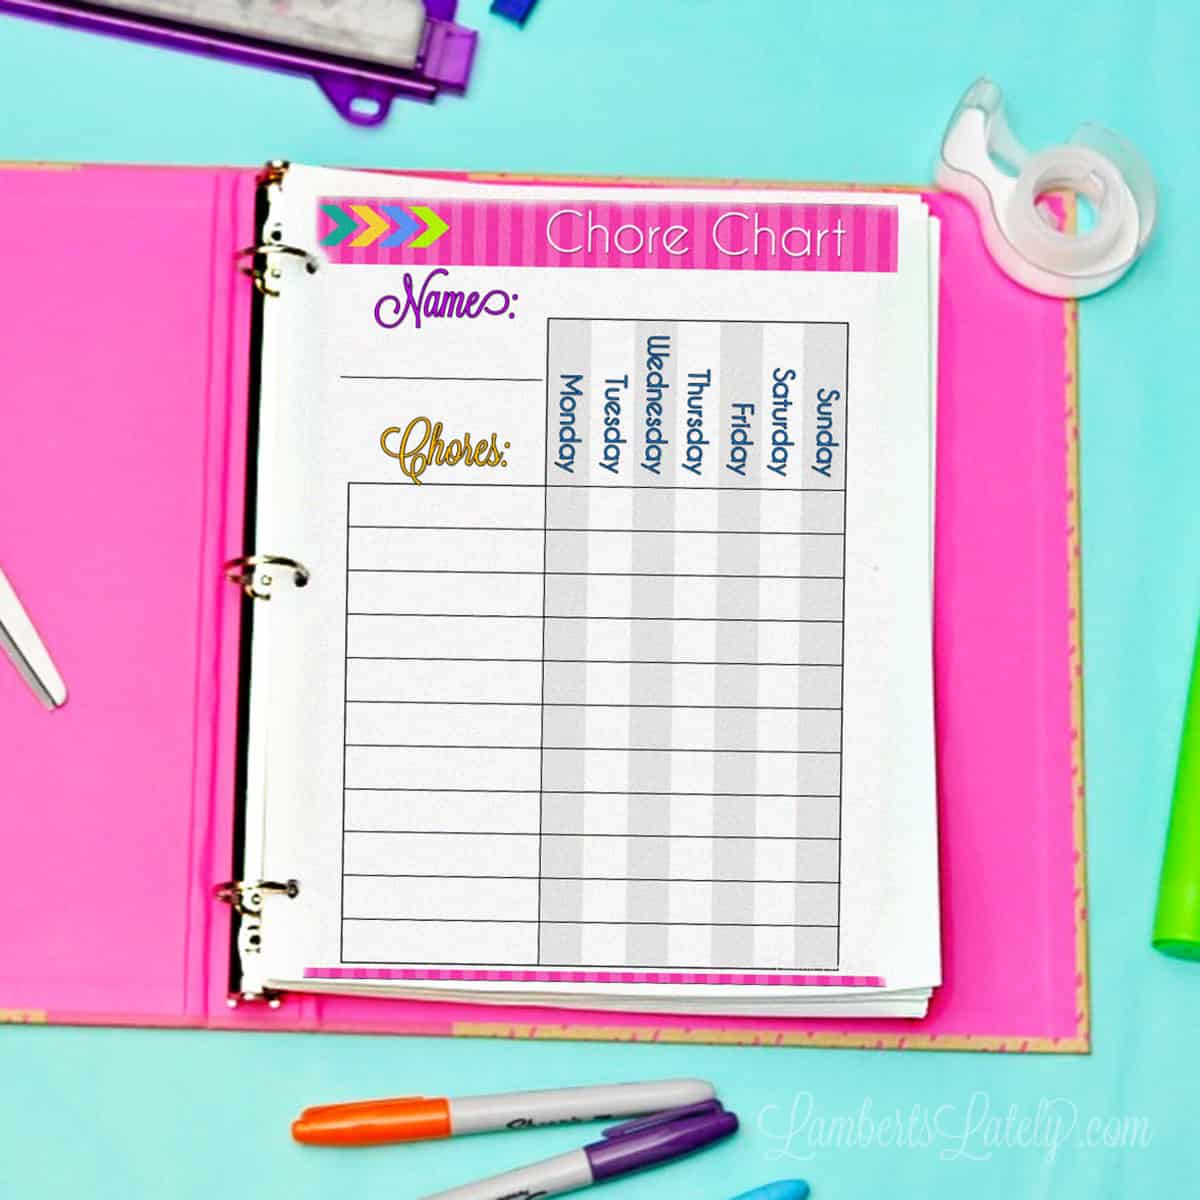 chore chart printable in a notebook on a desk.